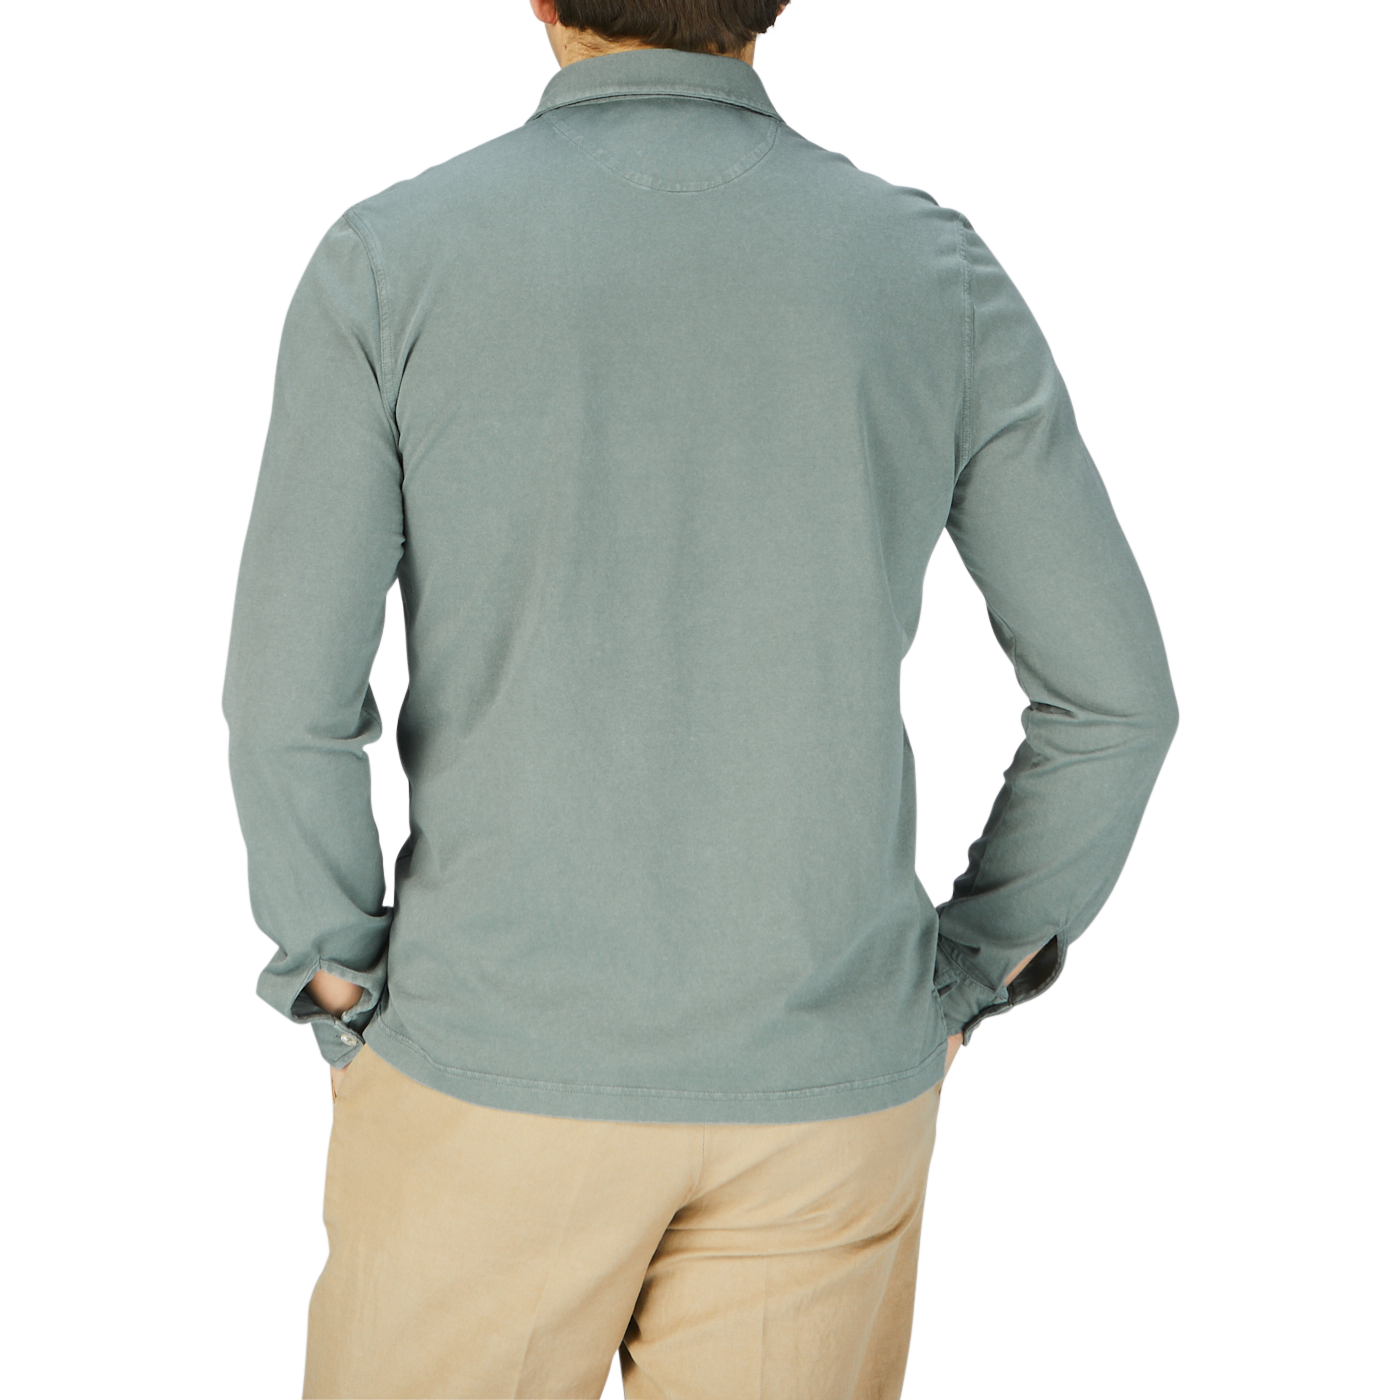 The back view of a man wearing a Fedeli Olive Green Organic Cotton LS Polo Shirt and khaki pants.